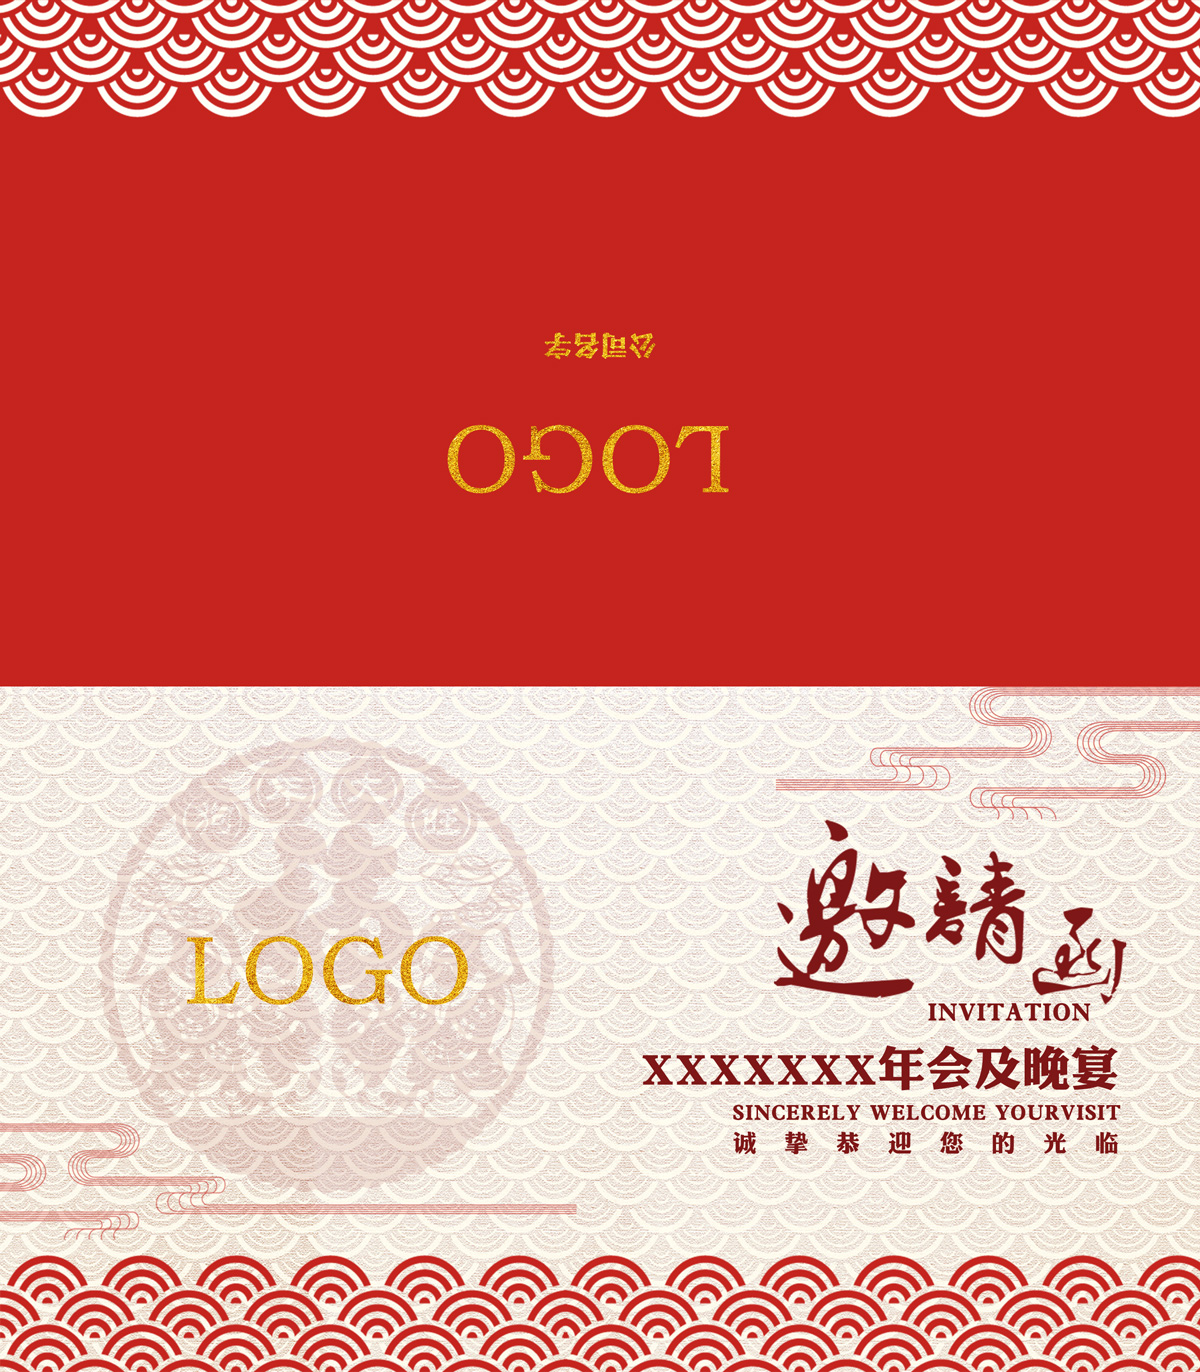 Design of party invitation for Chinese design style PSD File Free Download